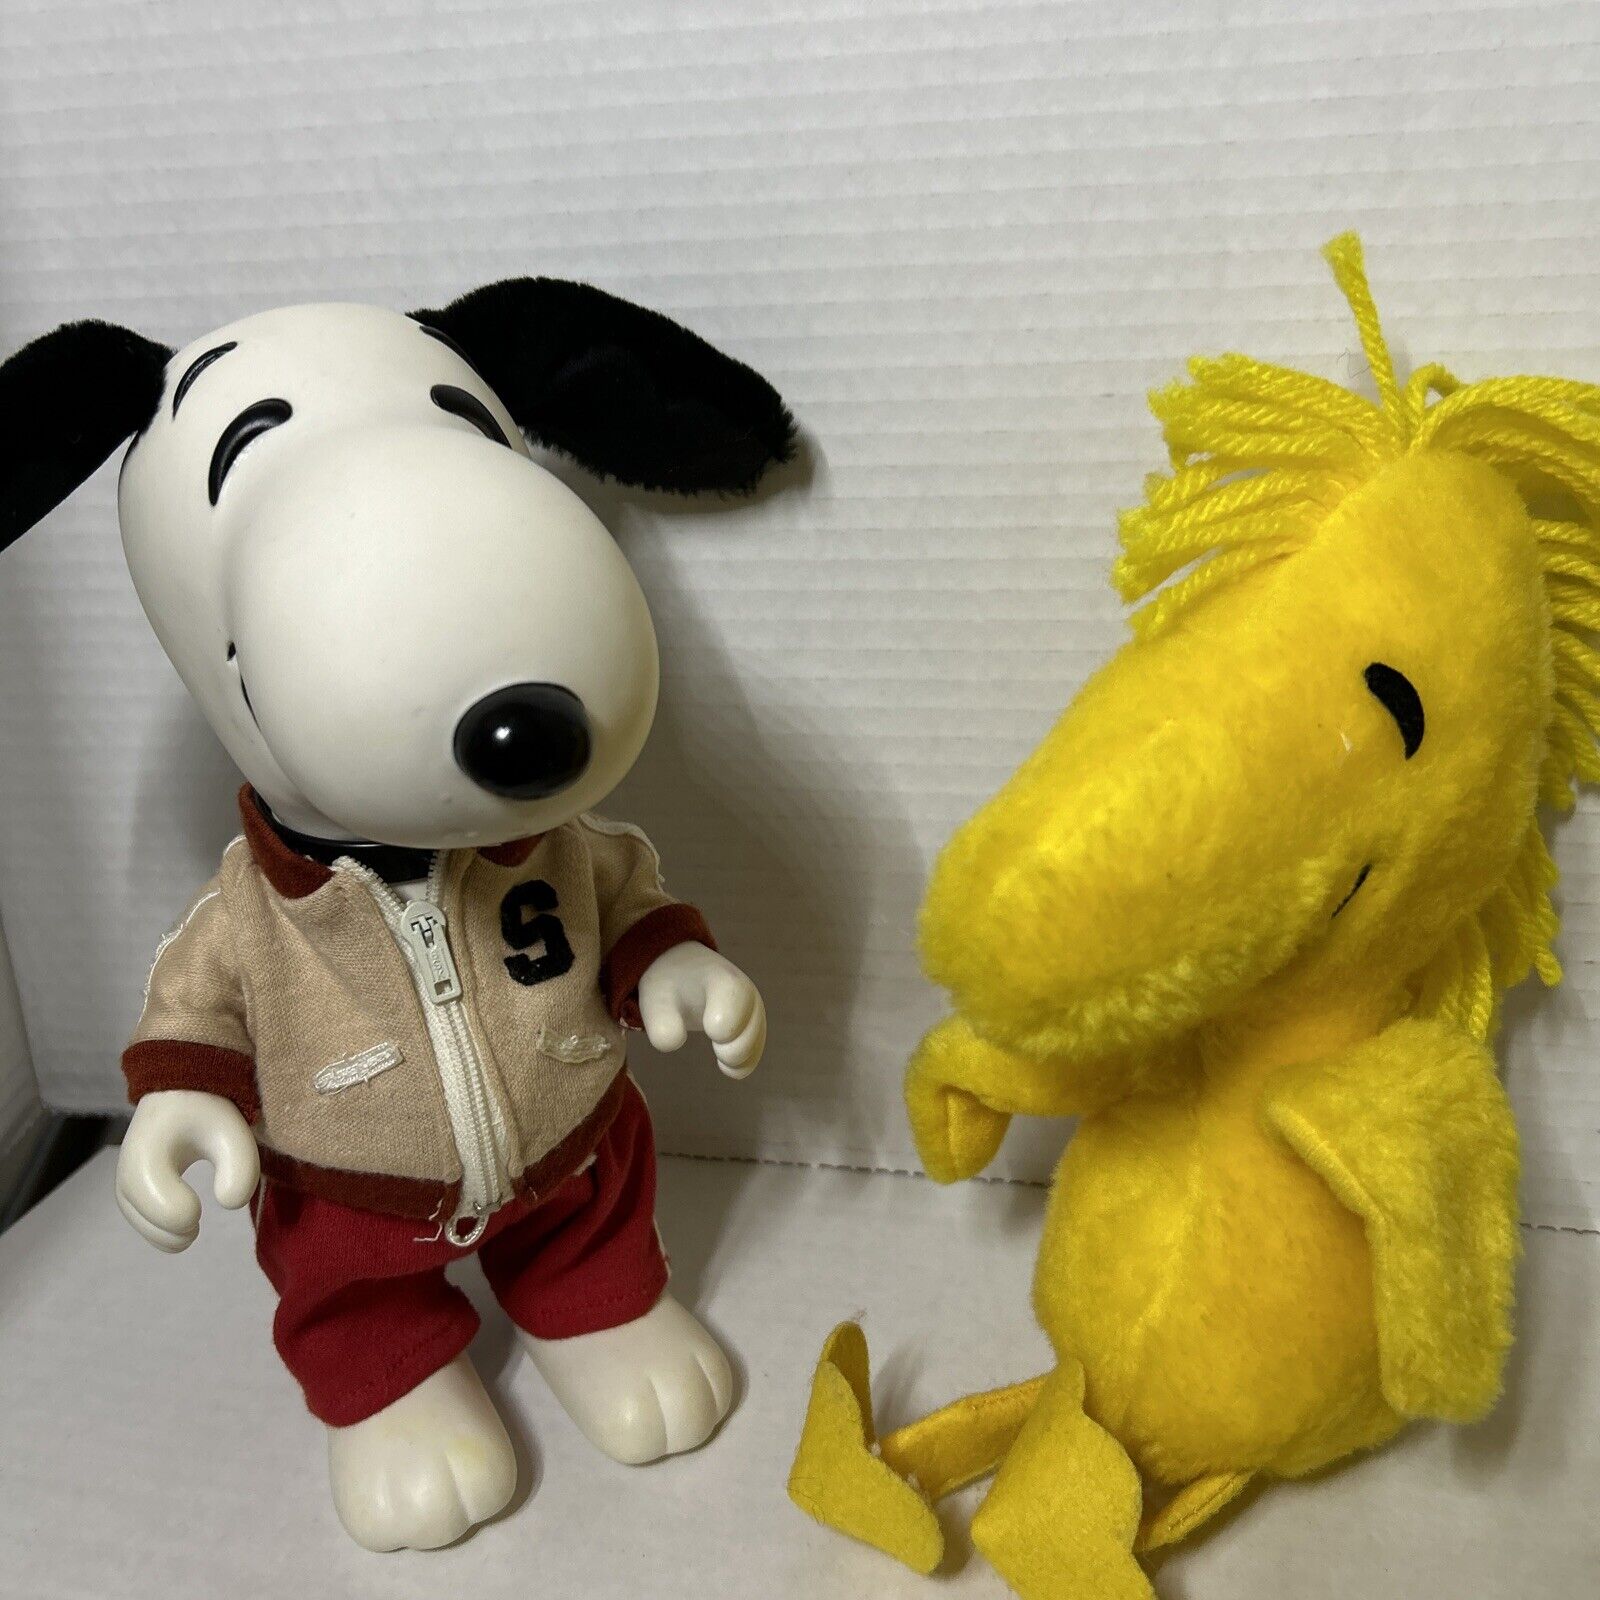 Snoopy In Track Suit Determined Production 1966 Vintage/Woodstock Plush Pair